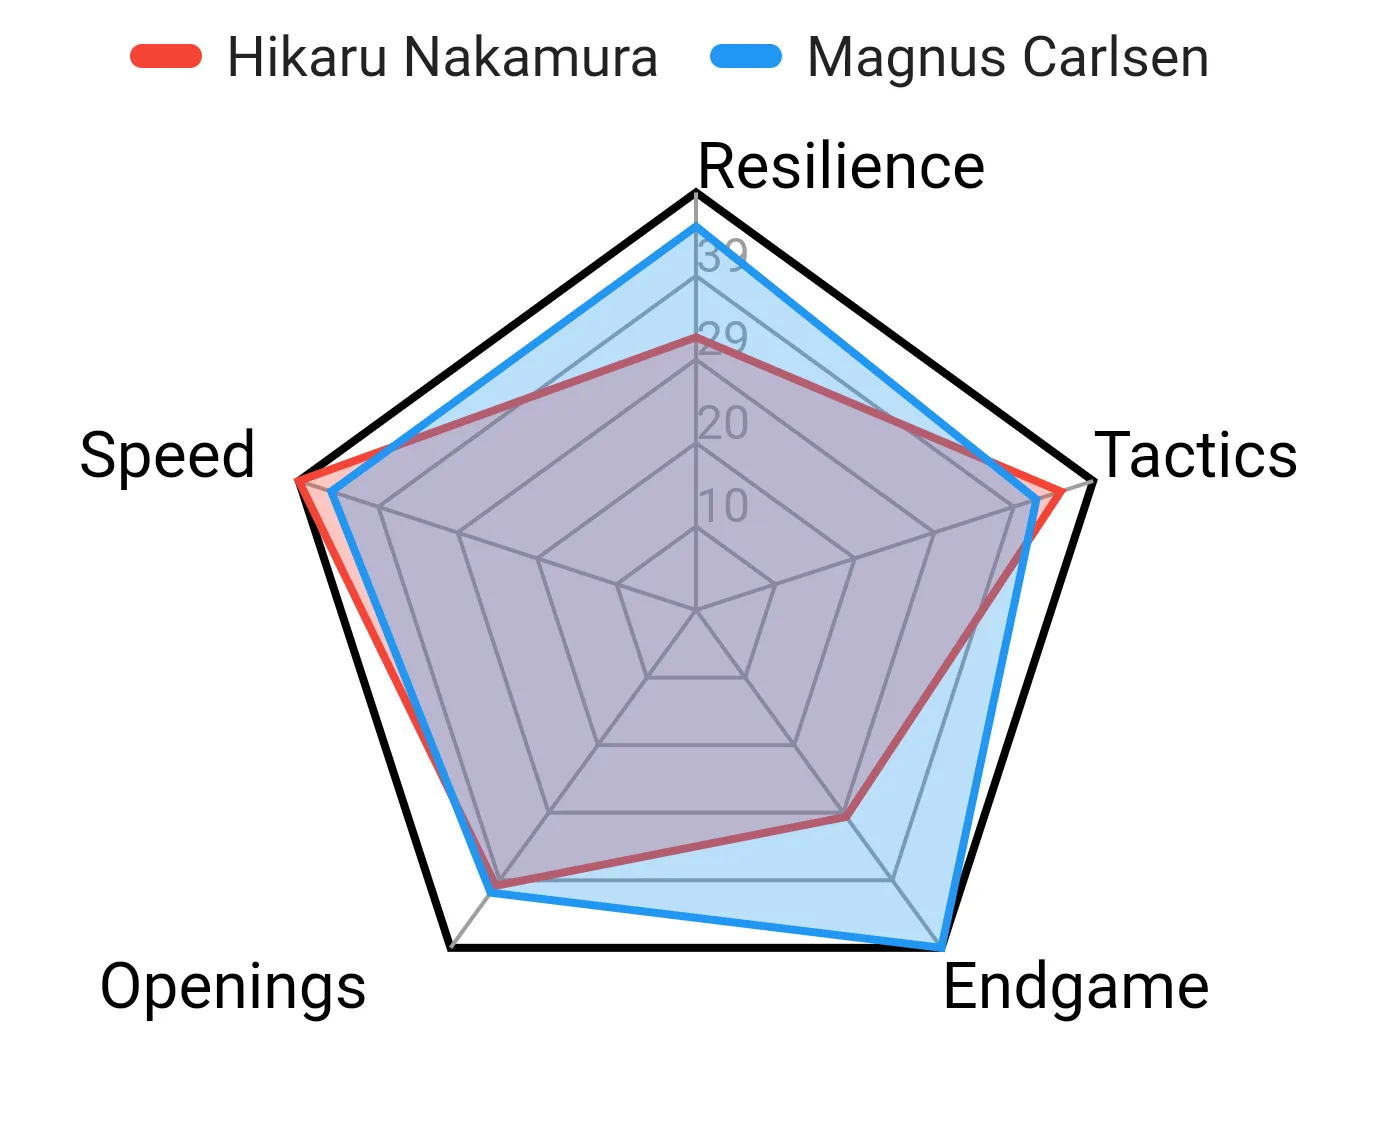 This illustration shows the difference in ability/skill between Carlsen and Nakamura. It can be seen here that Magnus is way better than Hikaru at the moment. 